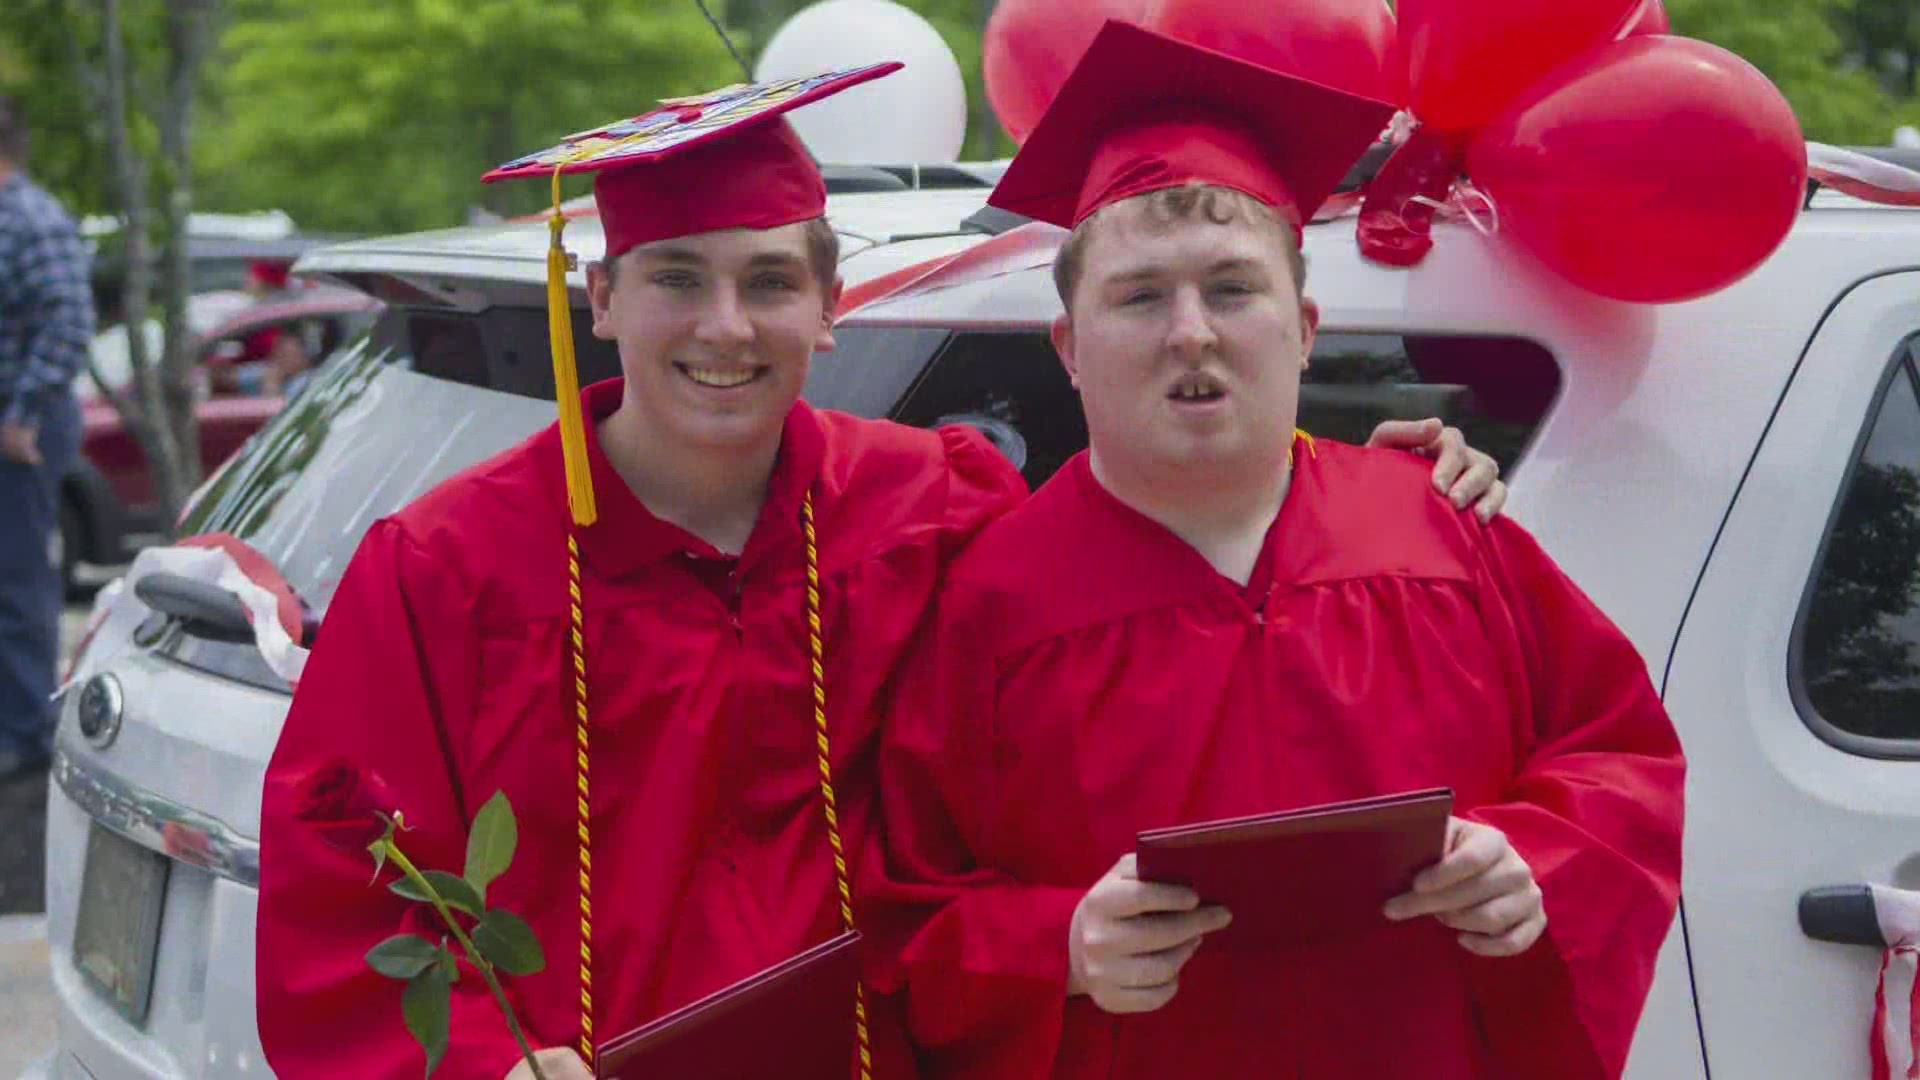 The two brothers got to compete on the basketball court together, and got their diplomas together.